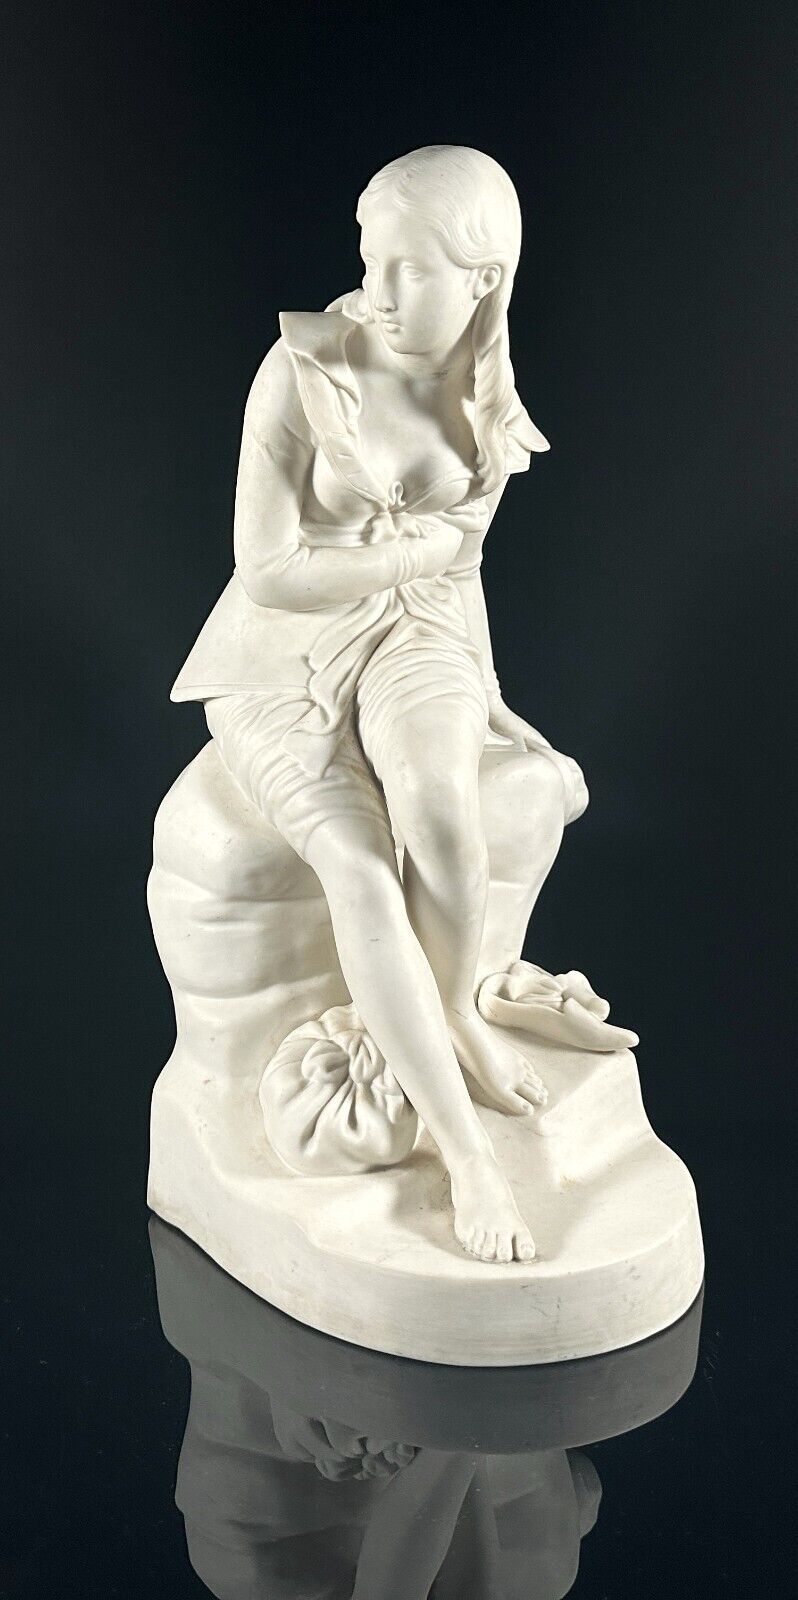 Minton Parian Figure of Dorothea by John Bell, 1845-1850